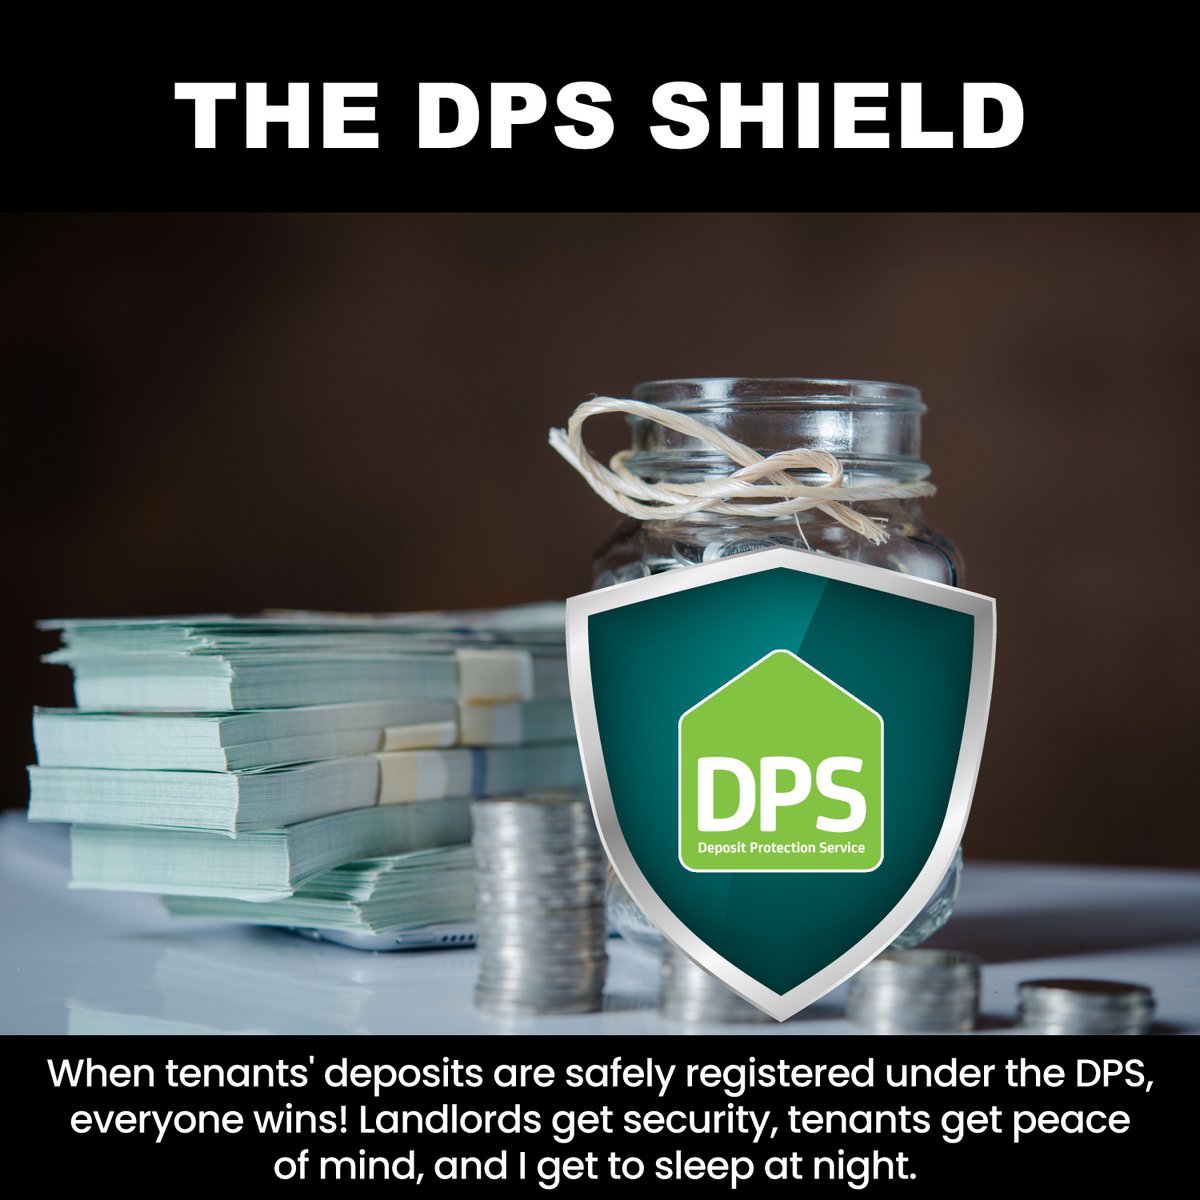 Protecting tenants' deposits with The DPS Shield ensures security for landlords and peace of mind for tenants.  💼💰

#DepositProtection #TenantSecurity #LandlordPeaceOfMind #TheDPSShield #RealEstateUK #EstateAgentsBeckton